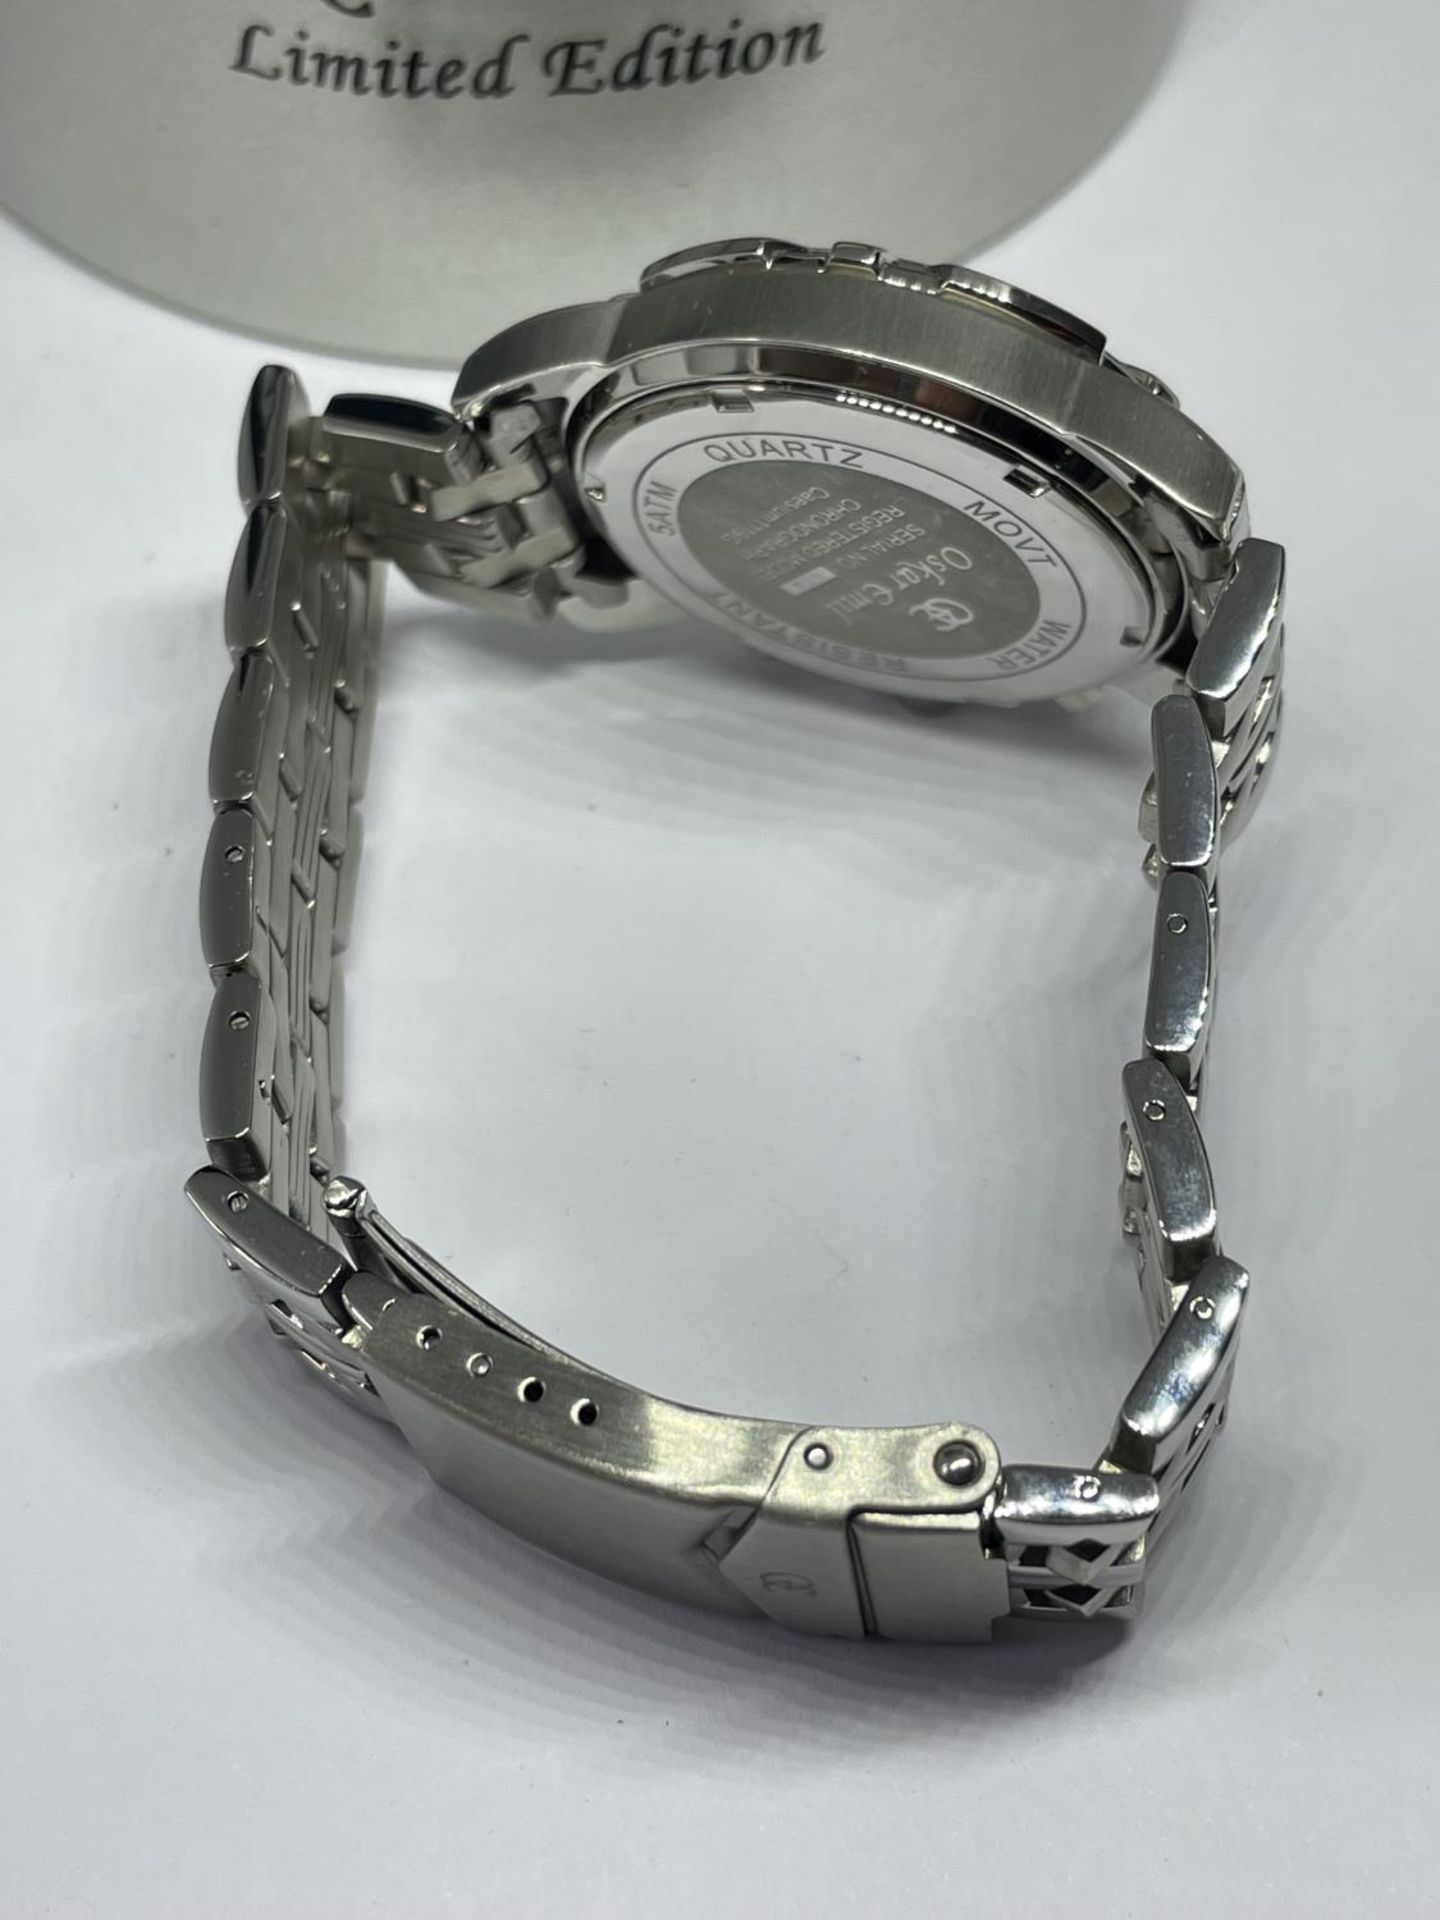 AN OSKAR EMIL LIMITED EDITION WATCH IN A TIN SEEN WORKING BUT NO WARRANTY - Image 3 of 4